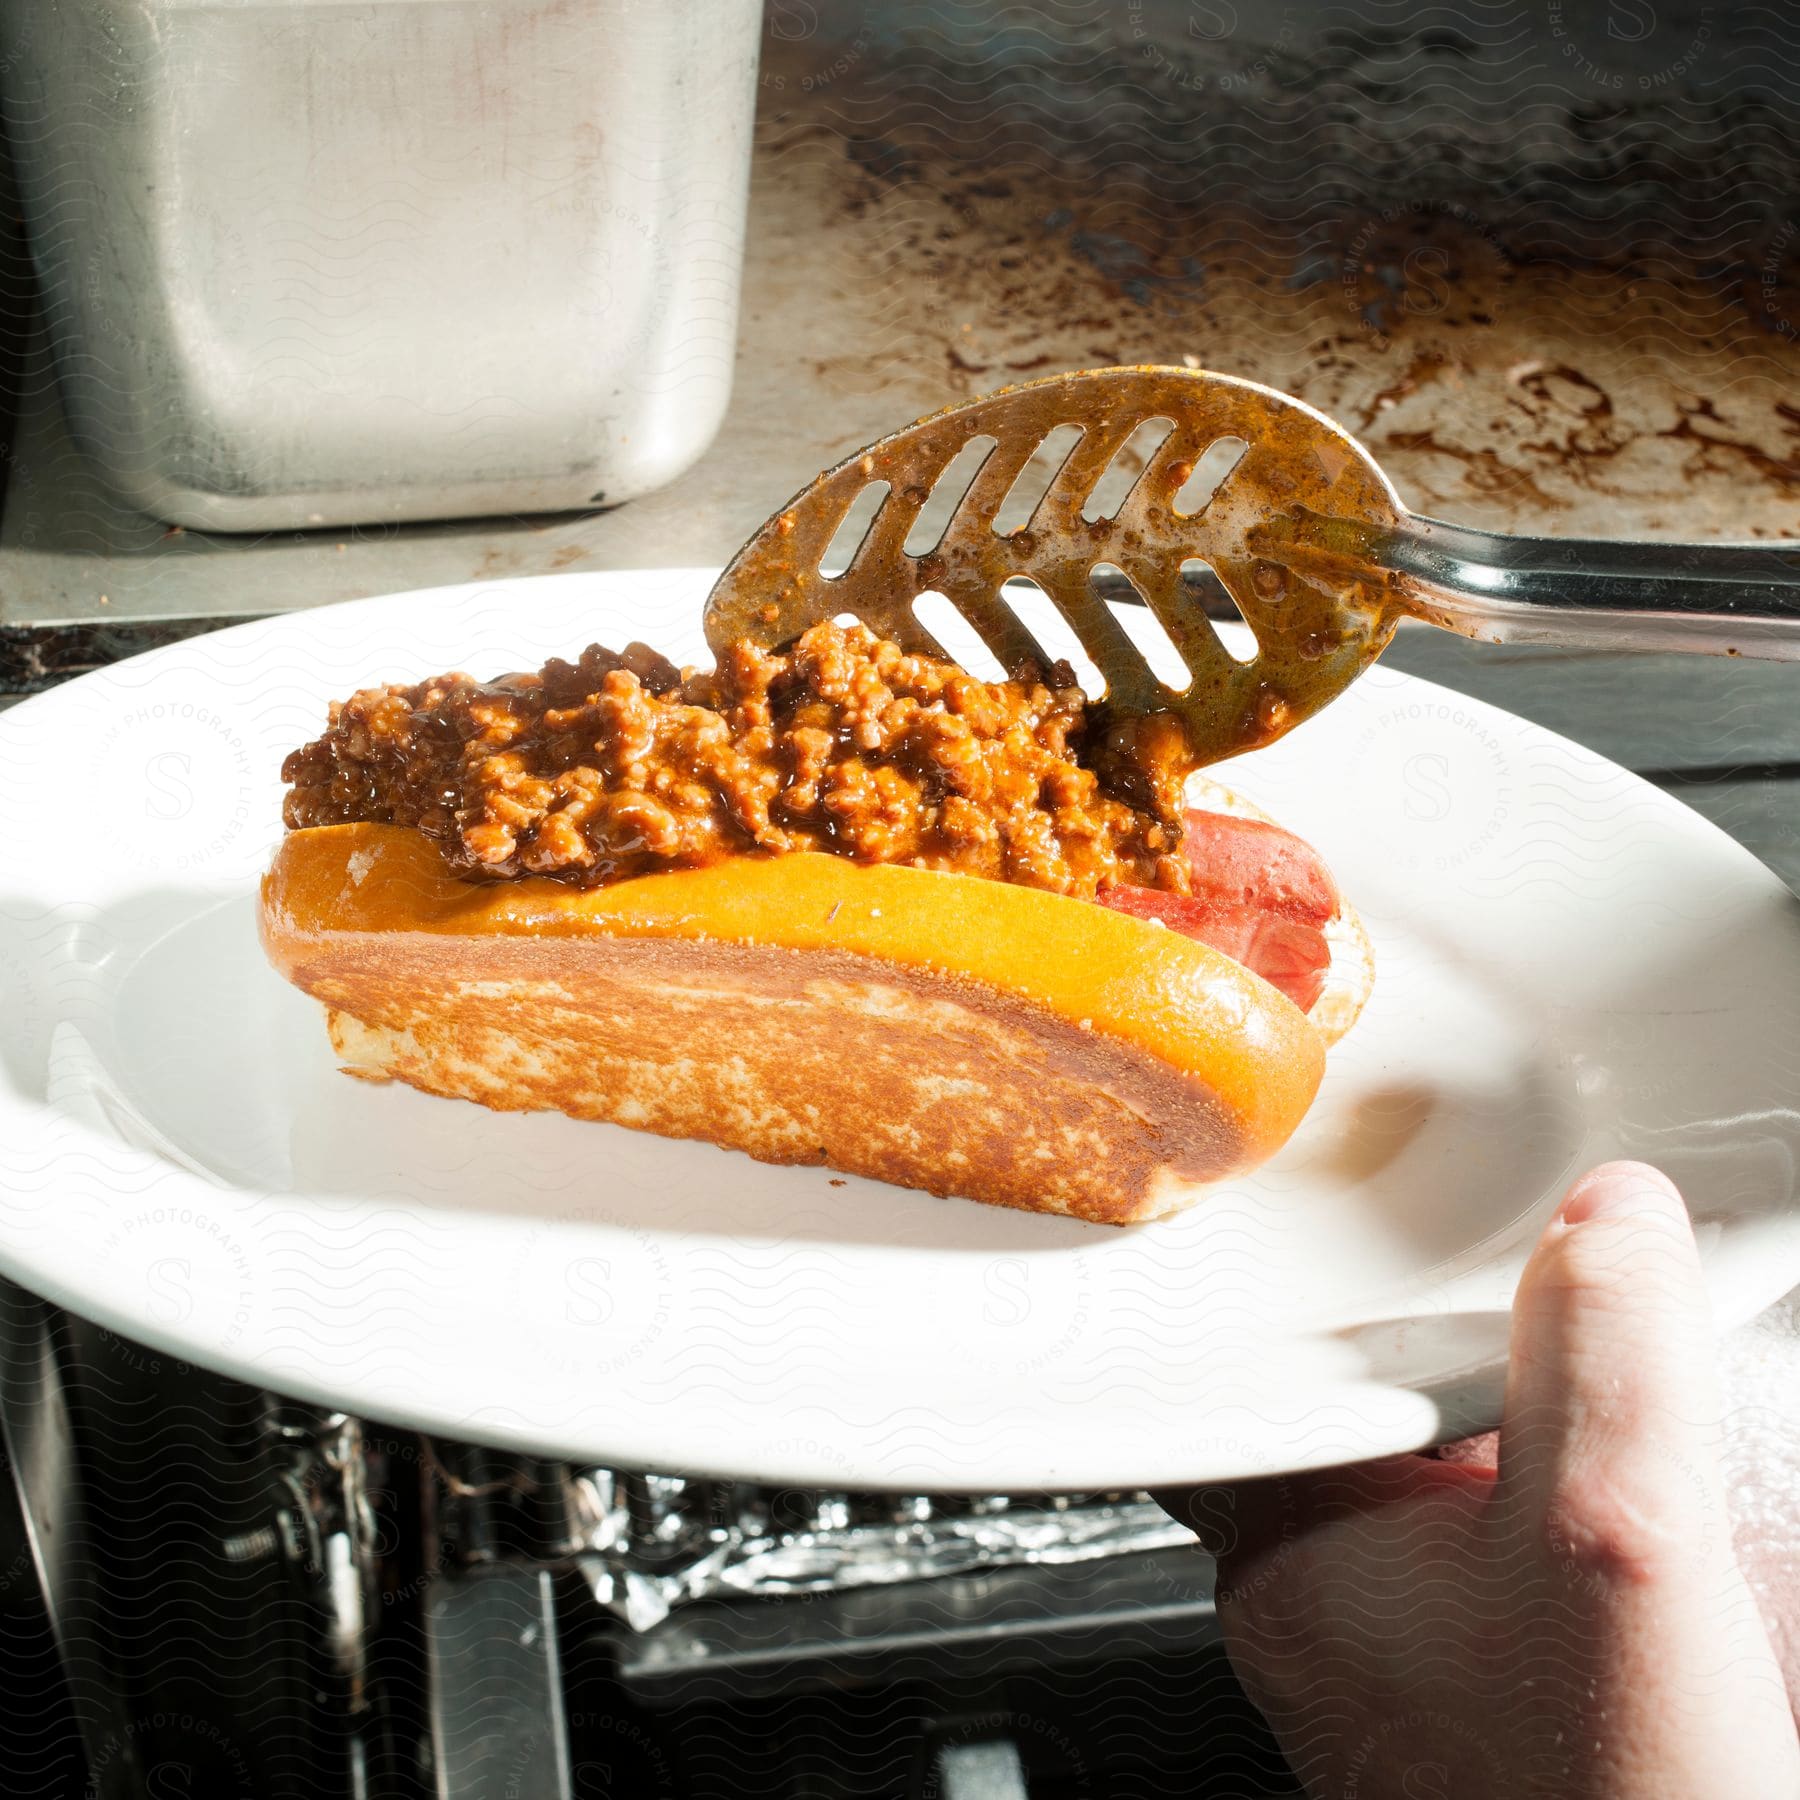 A person garnishes a chili dog with a generous helping of chili in a kitchen